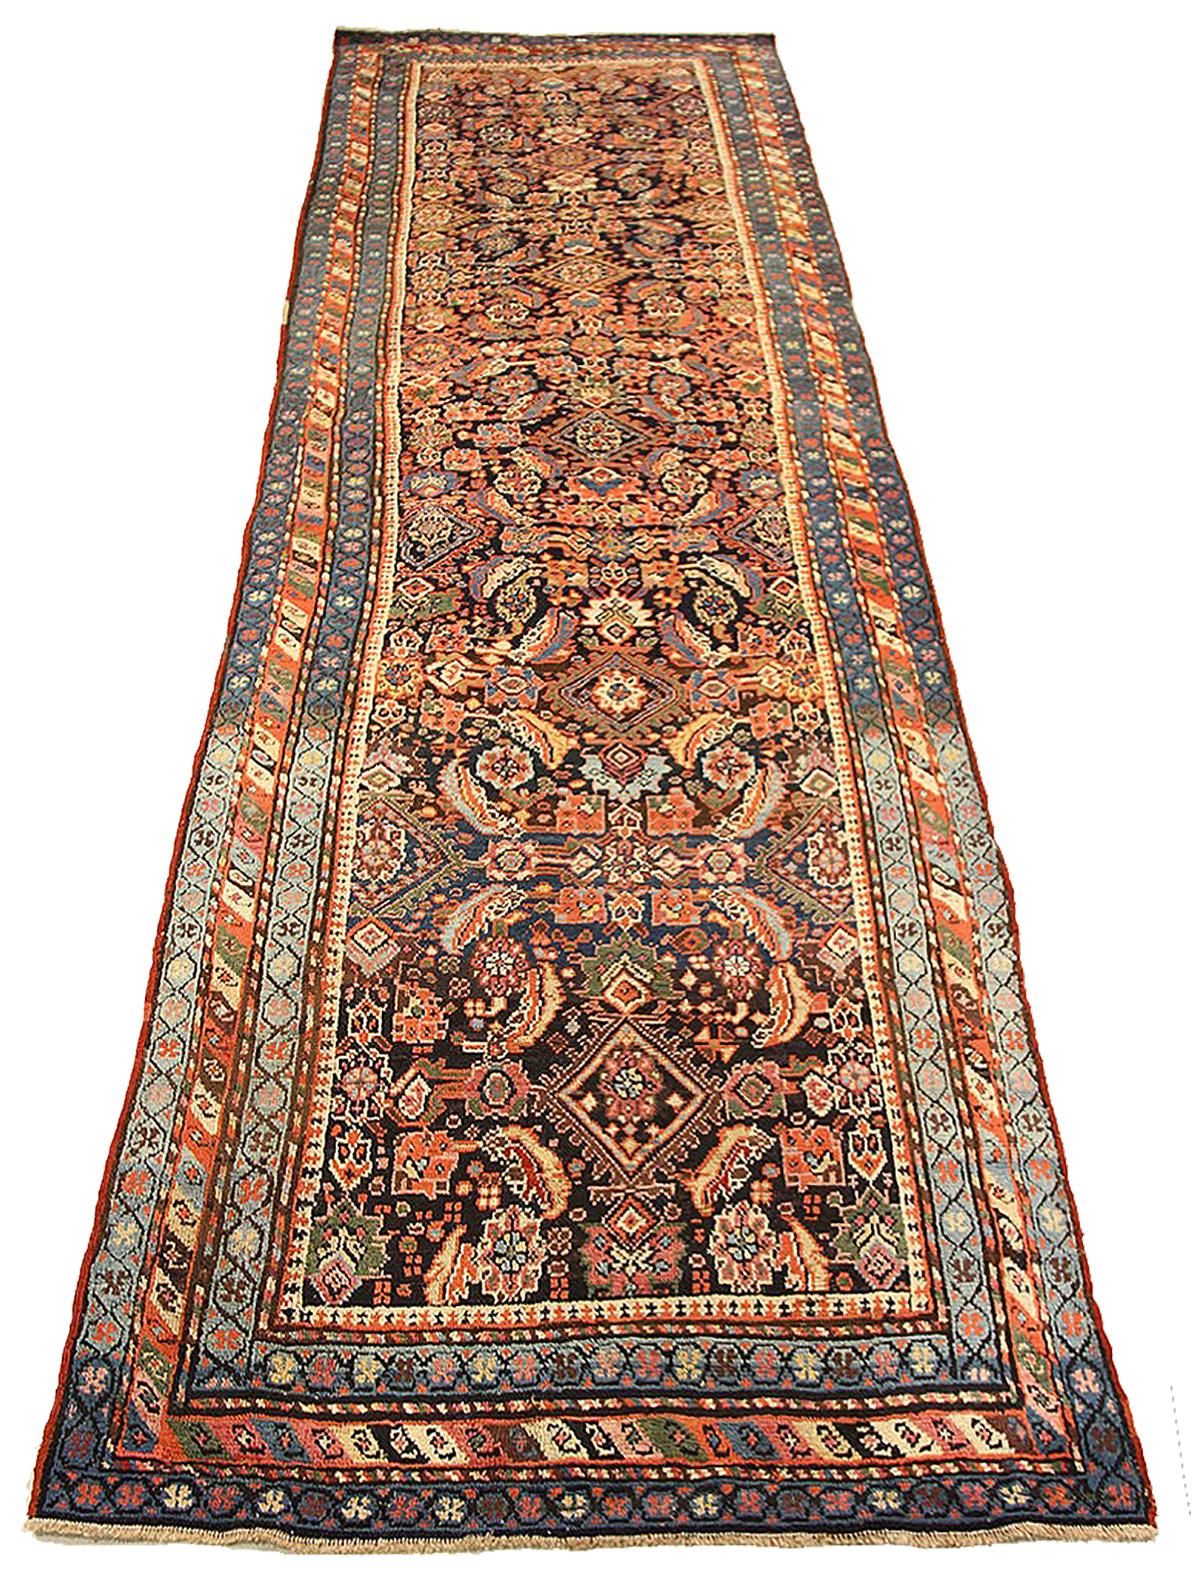 Antique Azerbaijan rug handwoven from the finest sheep’s wool and colored with all-natural vegetable dyes that are safe for humans and pets. It’s a traditional Azerbaijani design featuring mixed floral and geometric details in ivory and blue. It